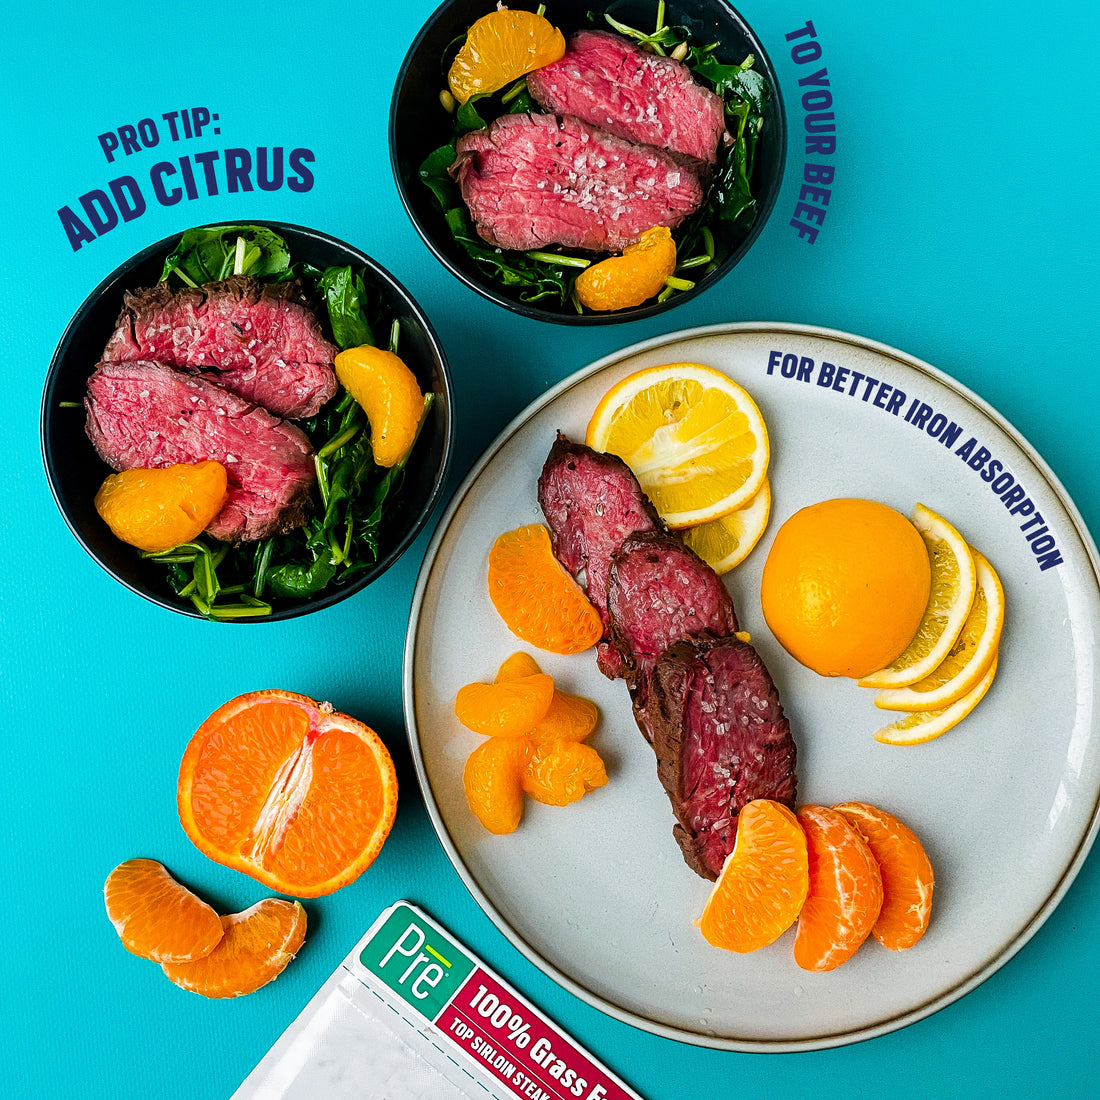 3 plates with steak slices and slices of oranges and small mandarin oranges places around them and on them. The bowls nearby have salad and steak with the oranges atop the salad. There is a package of Pre beef nearby that is a top sirloin steak.